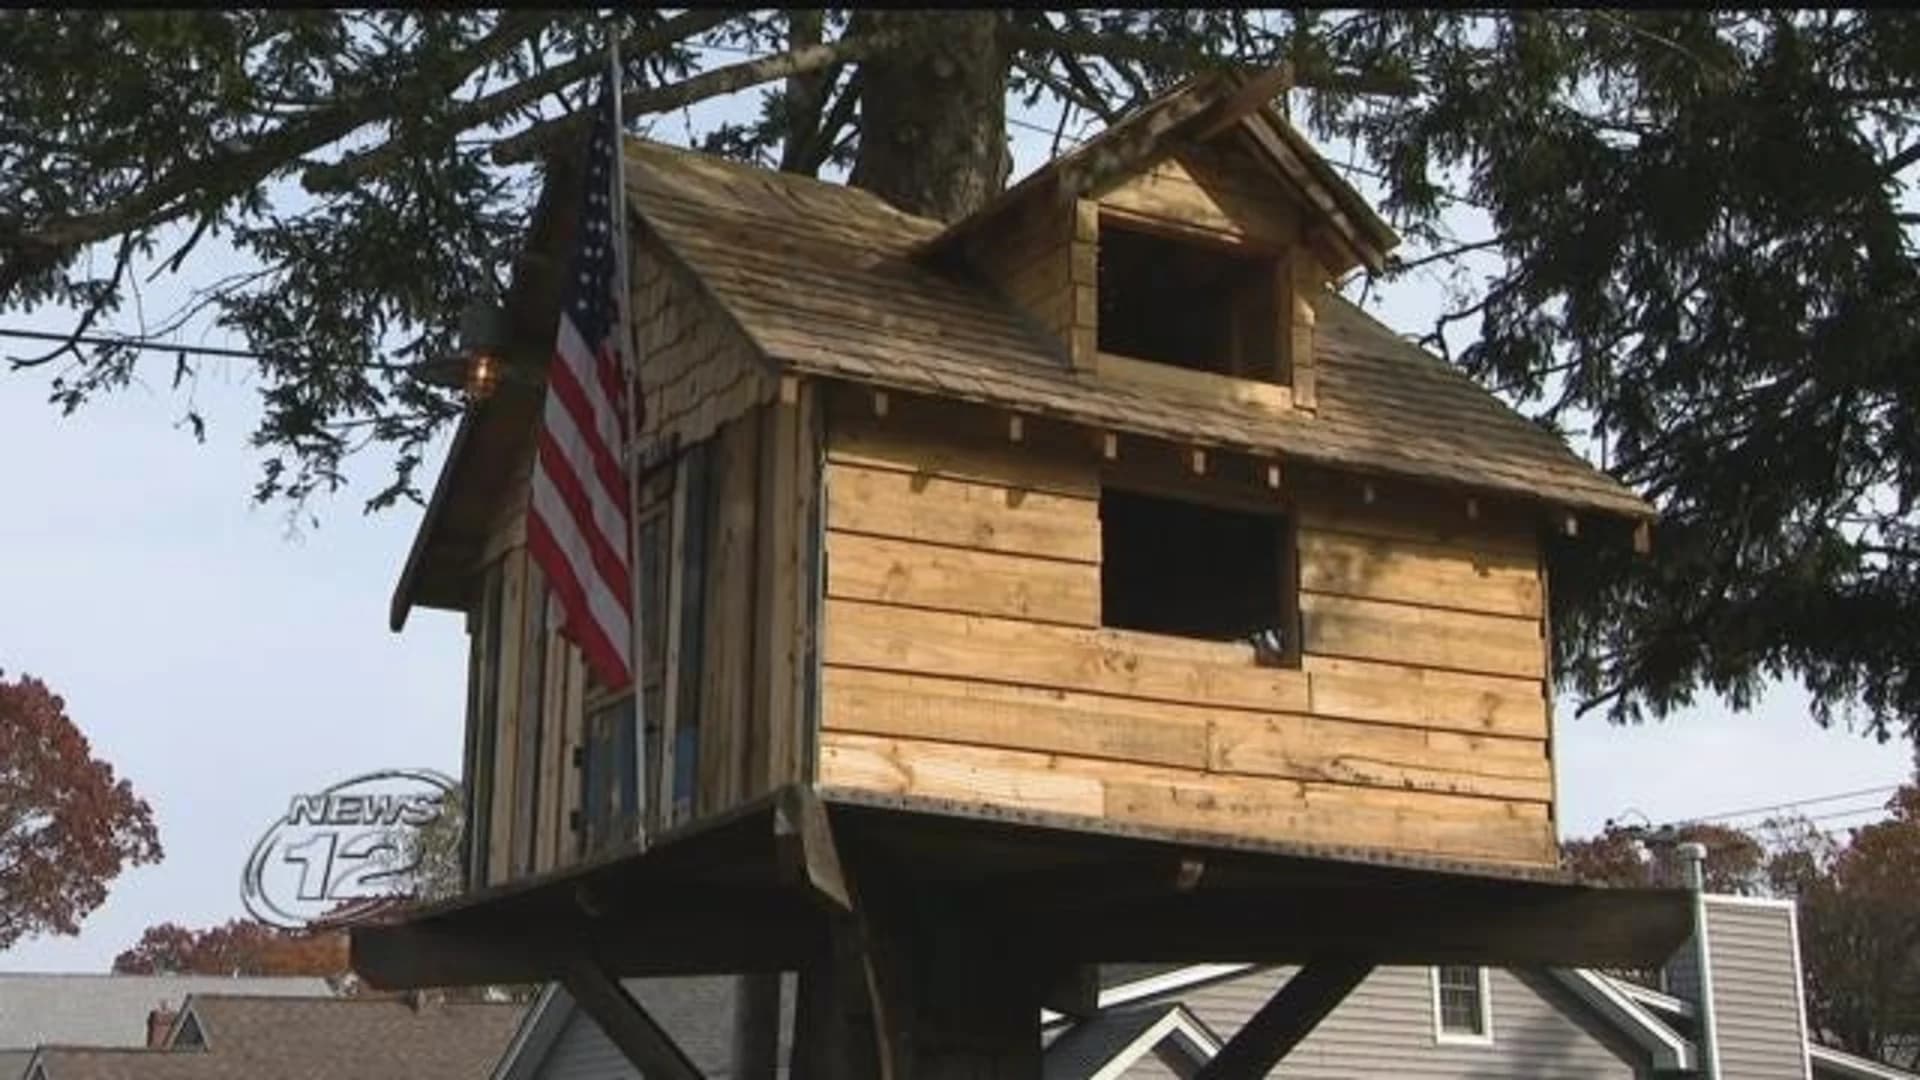 Father: Village forcing removal of treehouse made for son's birthday